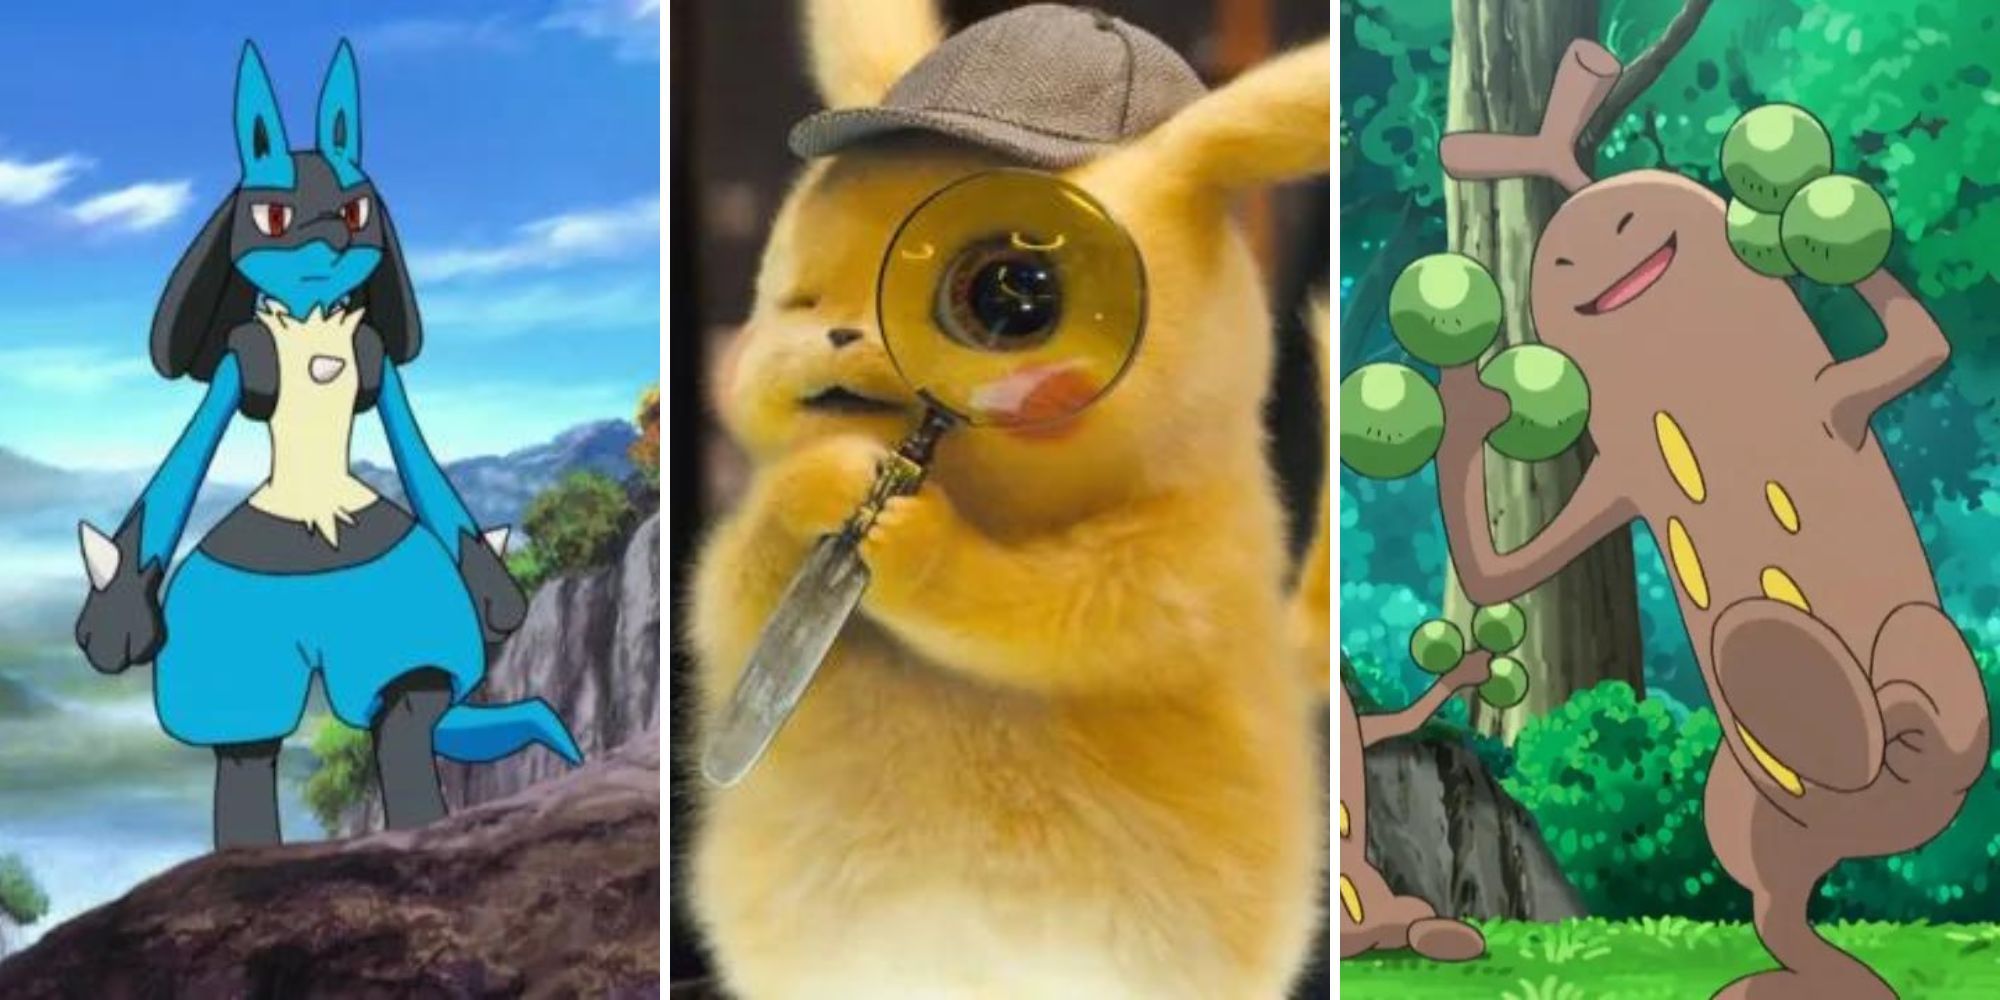 Lucario stands on a rock, Detective Pikachu looks through a magnifying glass, Sudowoodo dances in a jungle